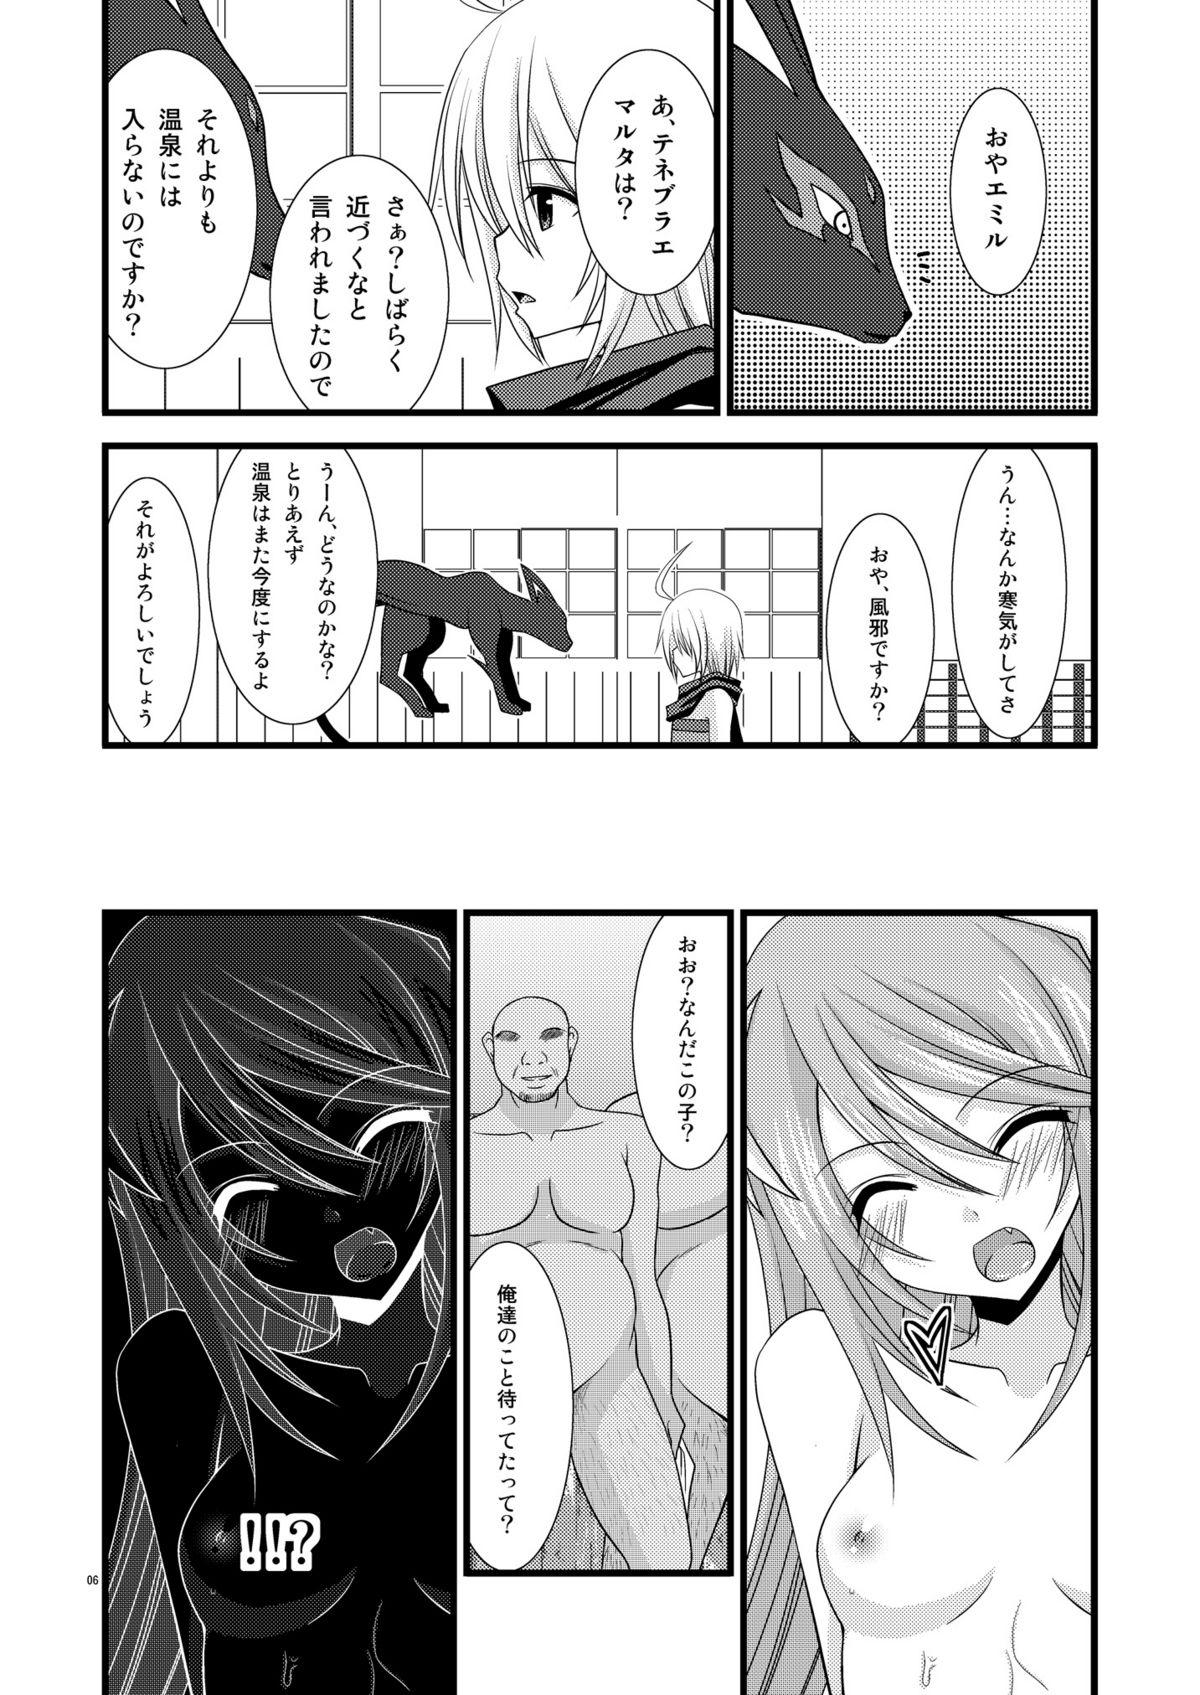 Love Making DREAM REALIZE - Tales of symphonia Twerk - Page 5